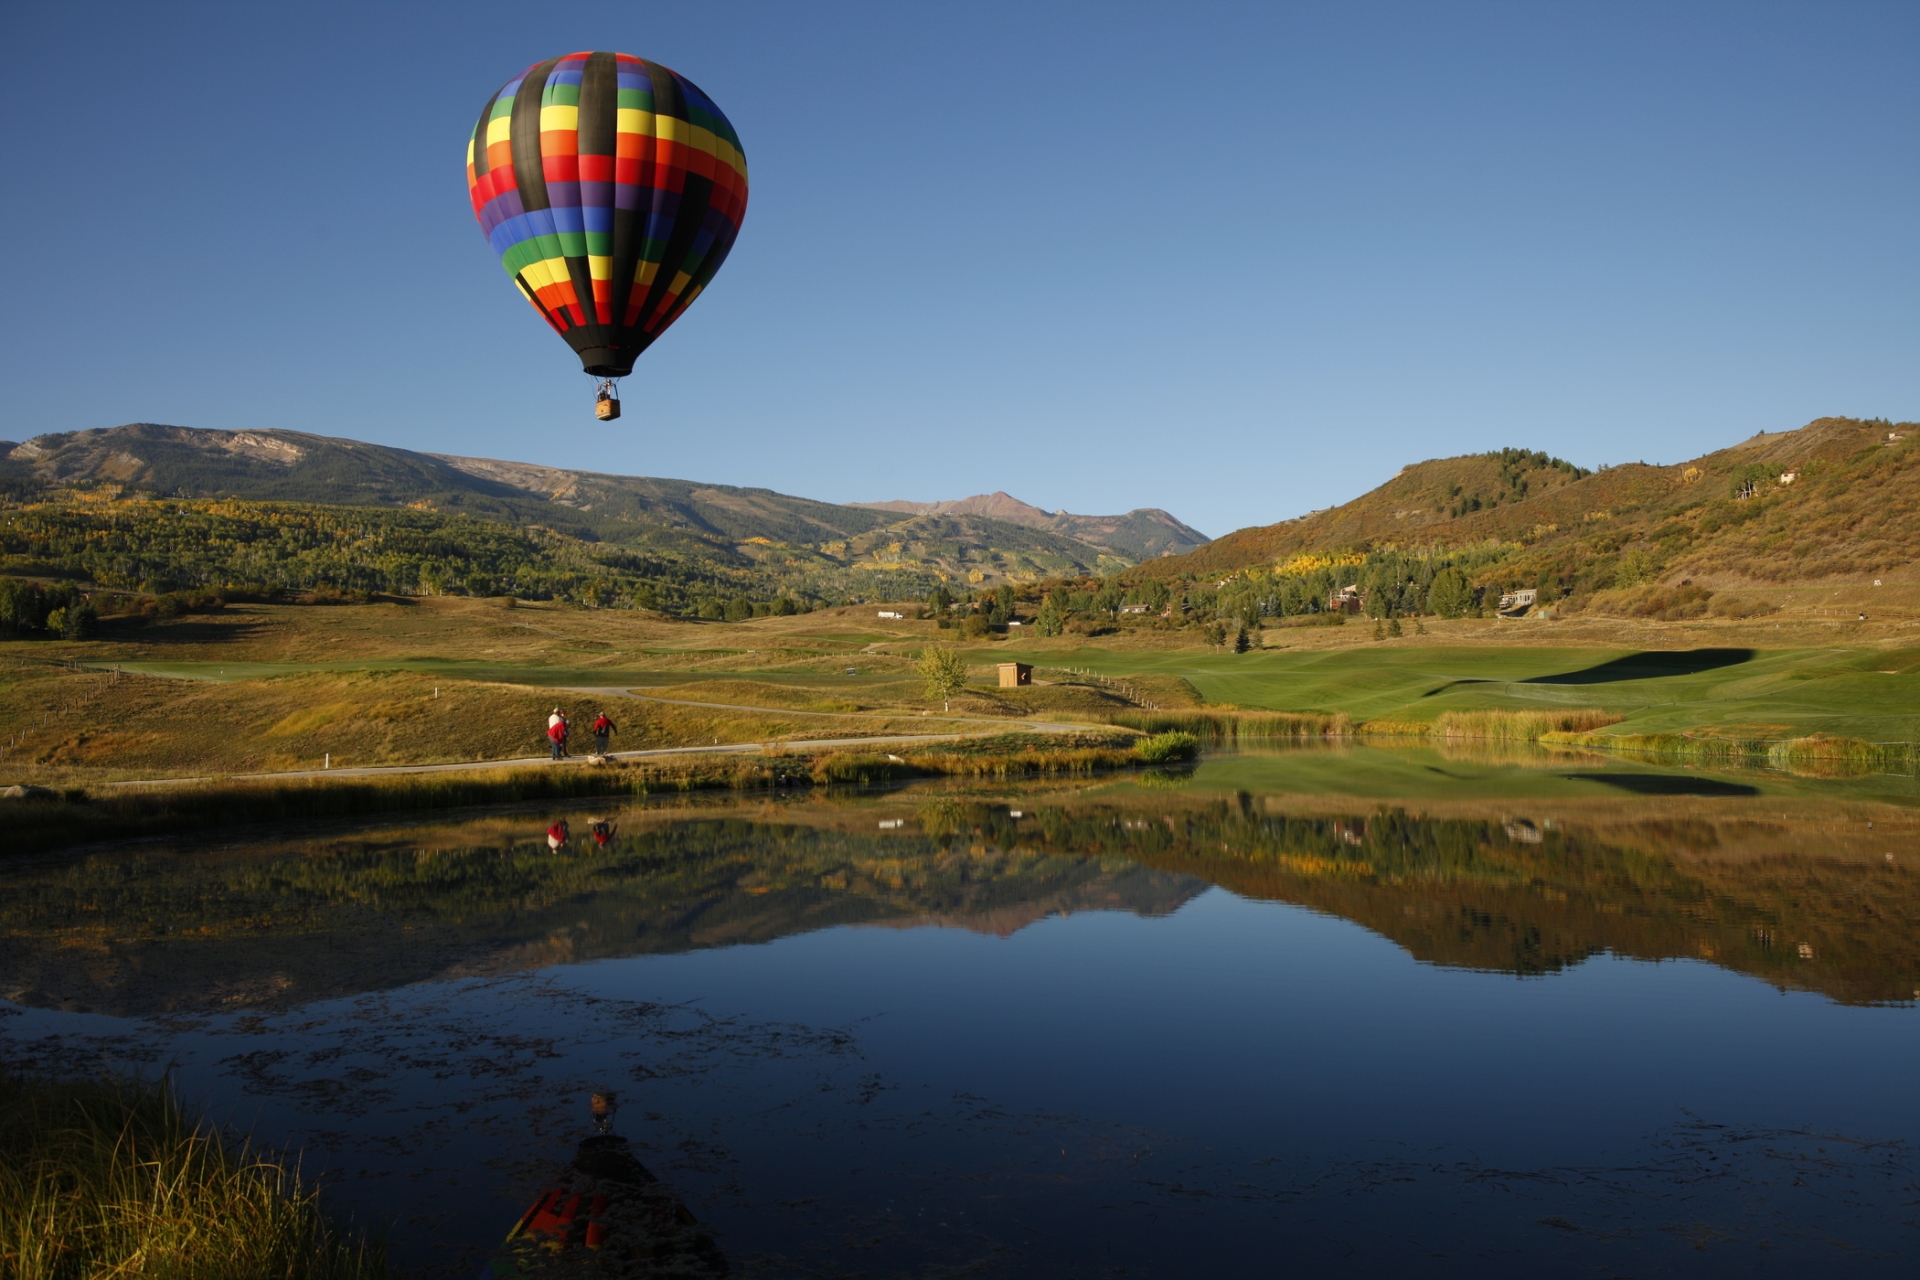 Ballooning over Aspen - The Ultimate USA Adventure